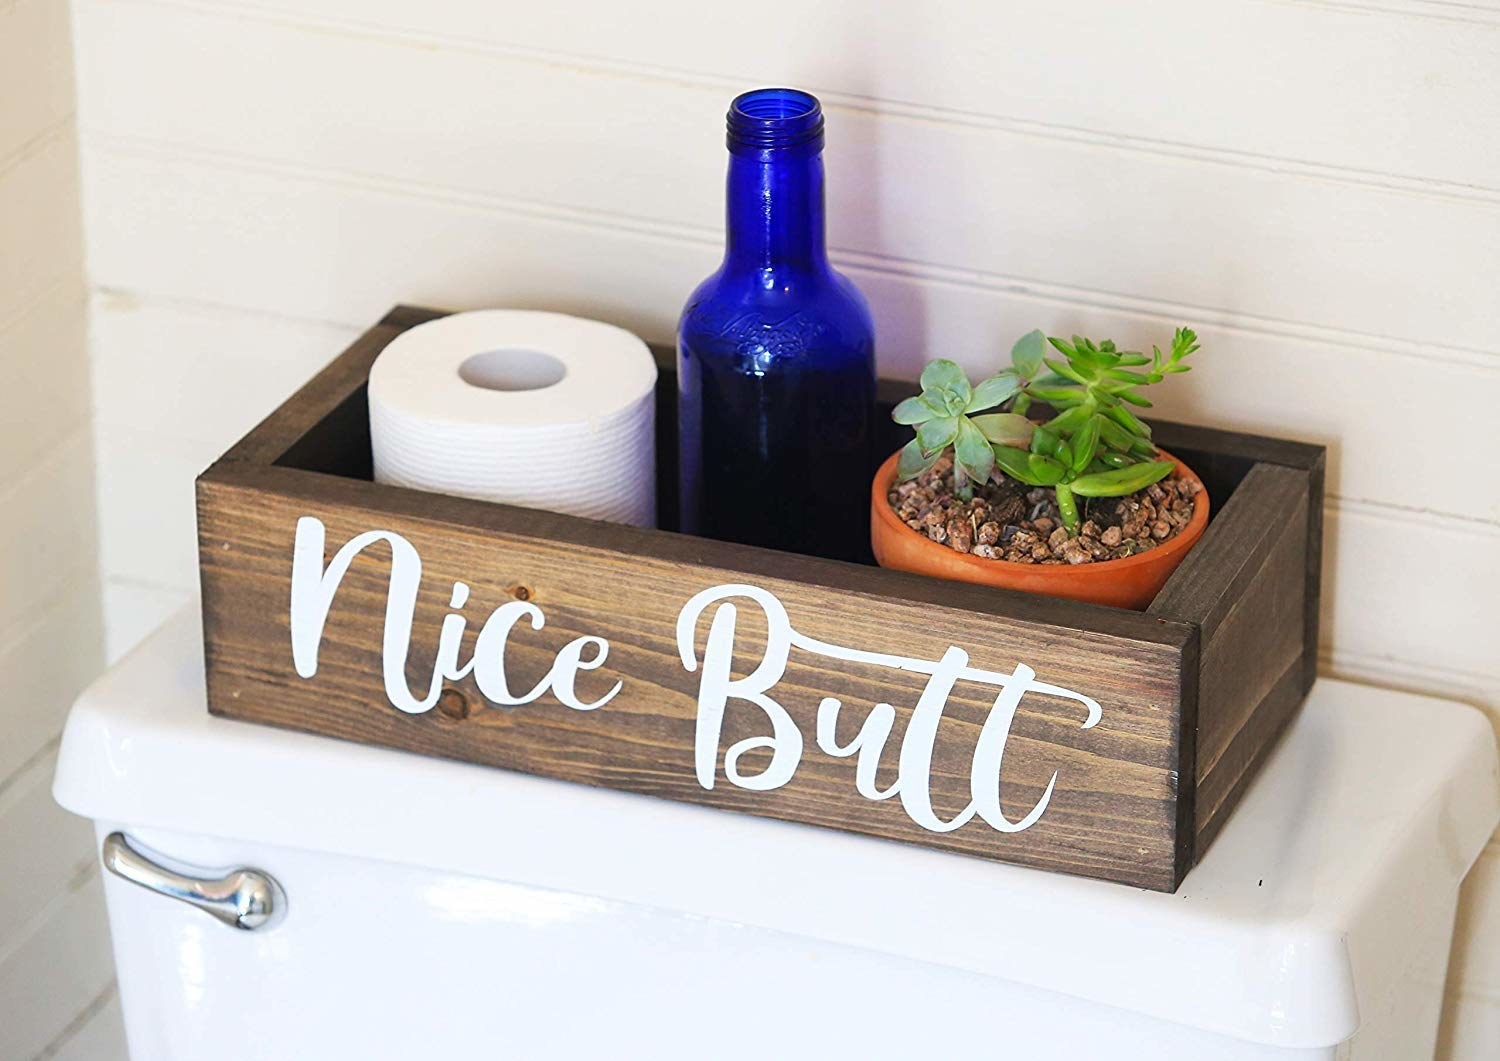 toilet tank with wooden storage box on it that says &quot;nice butt&quot; that holds toilet paper roll, plant, bottle